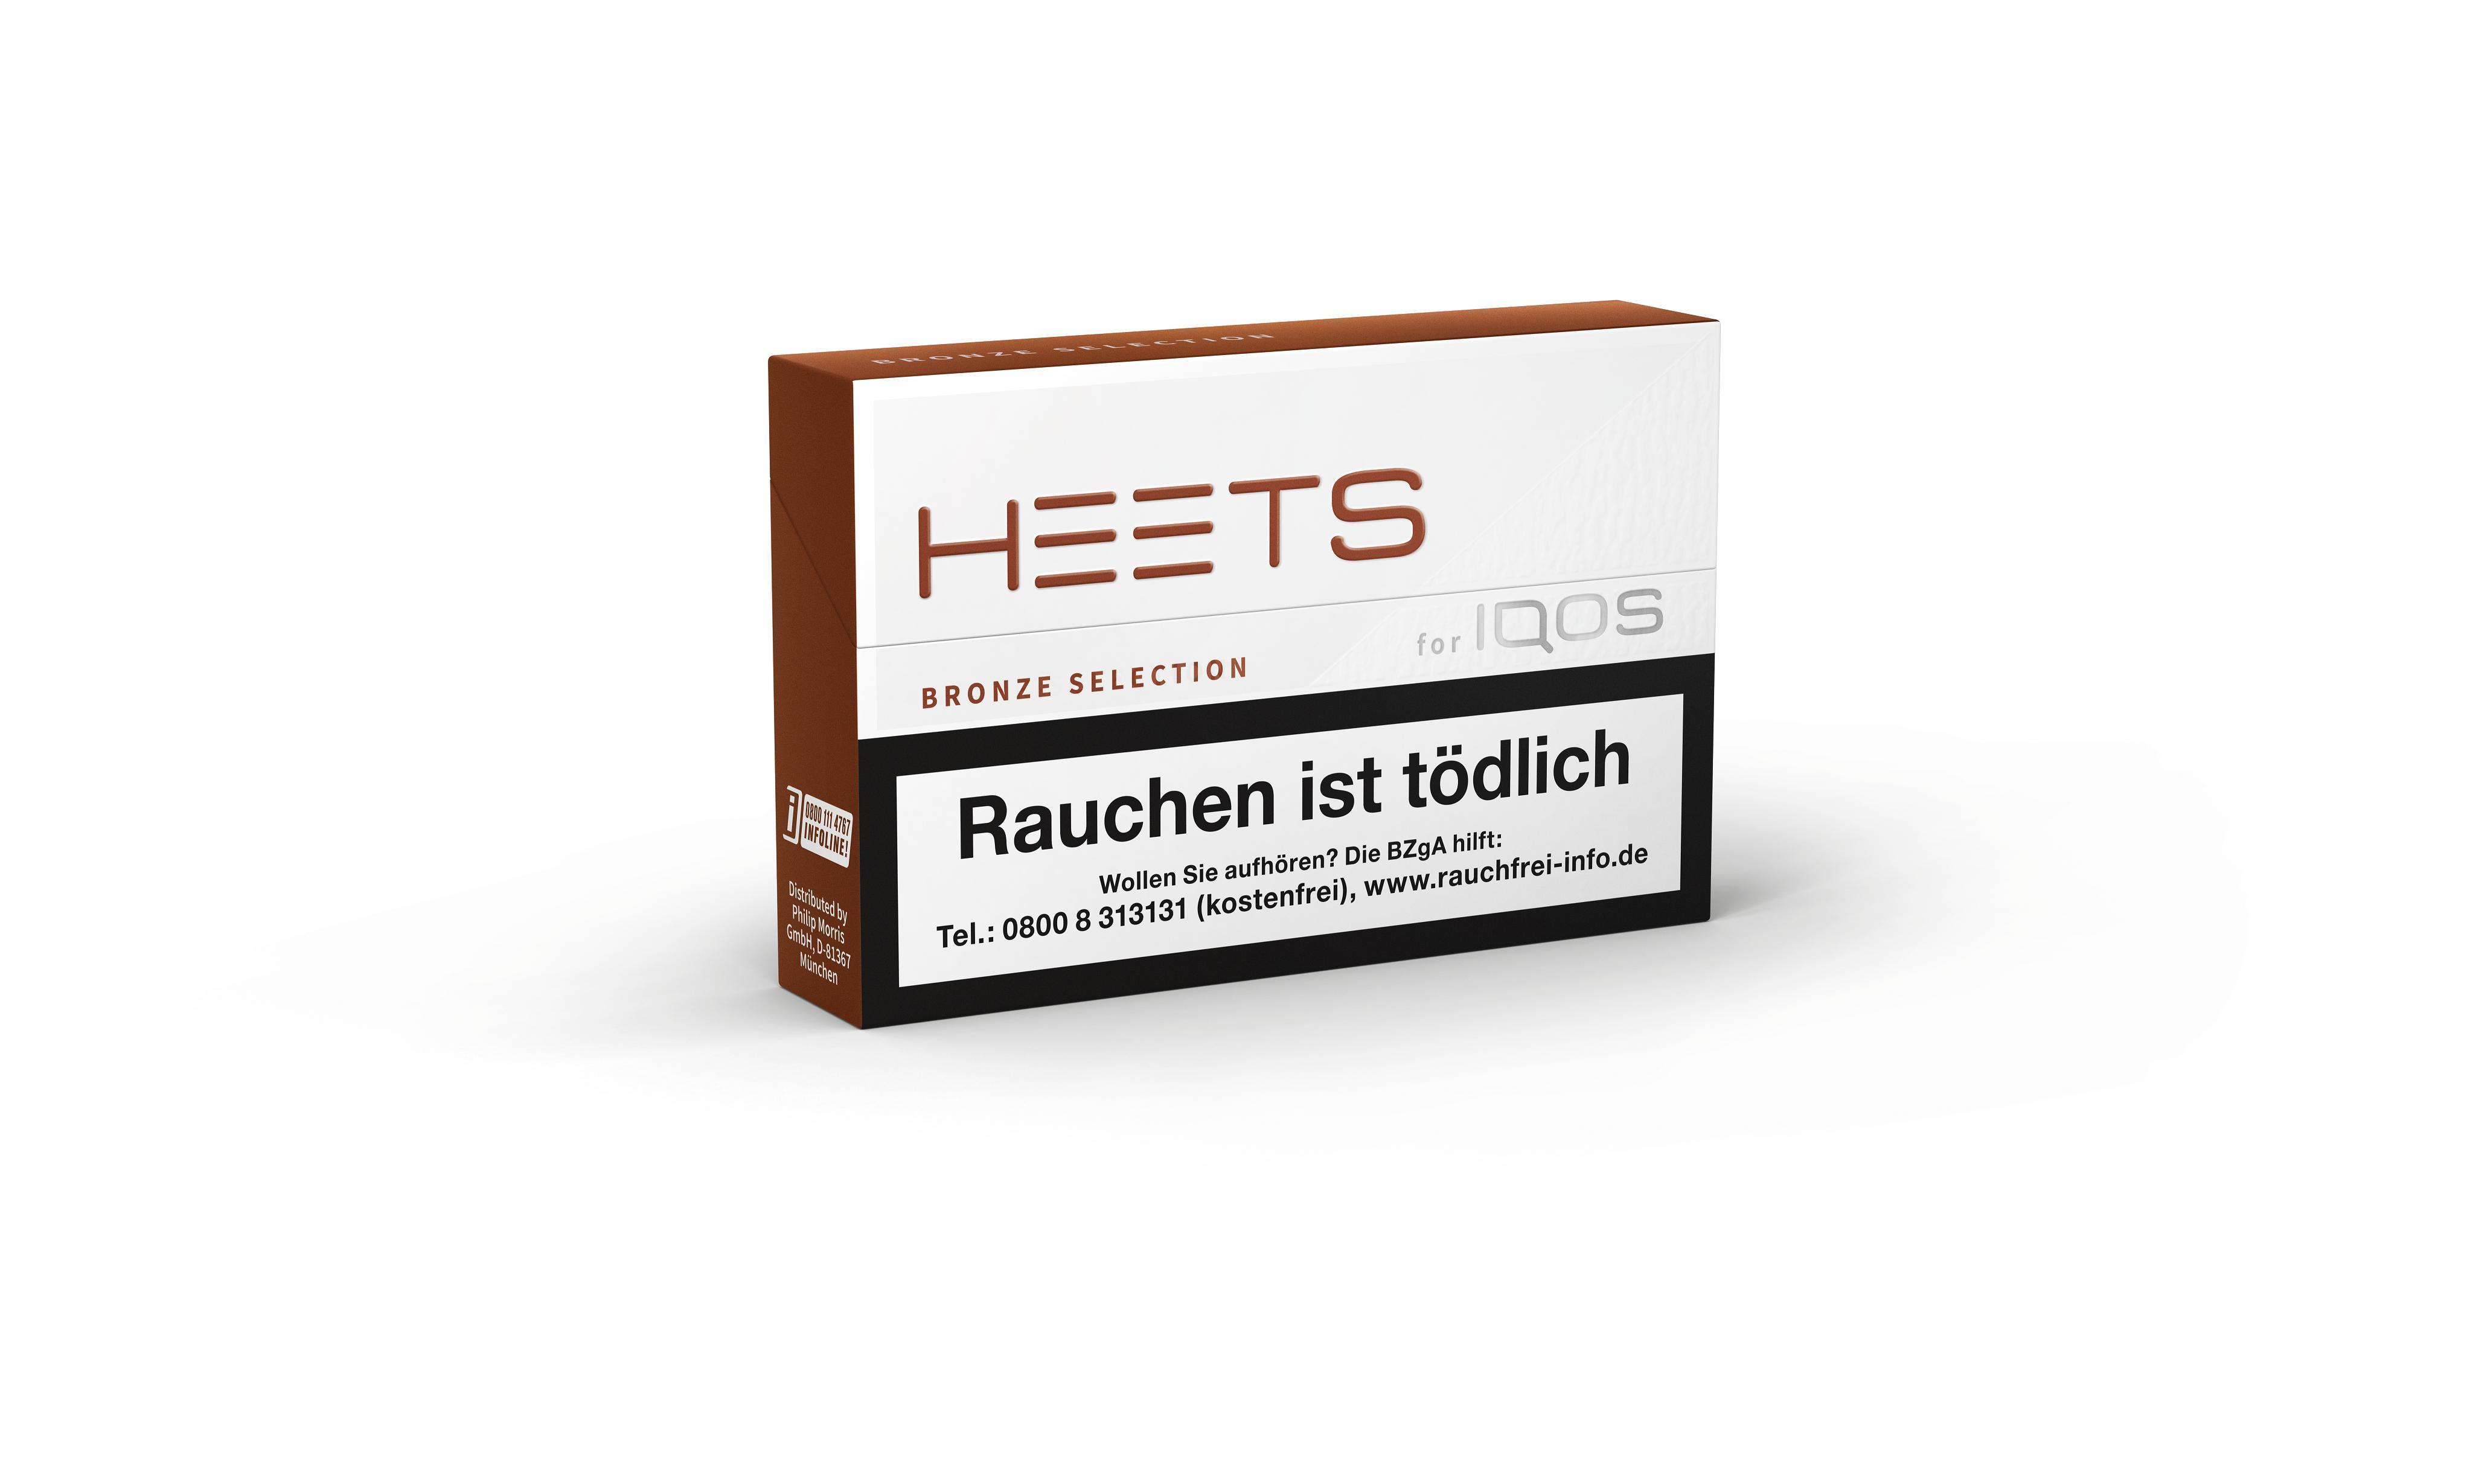 HEETS Bronze Selection | 1 x 20 Tobacco Sticks | 6 Euro pro Packung